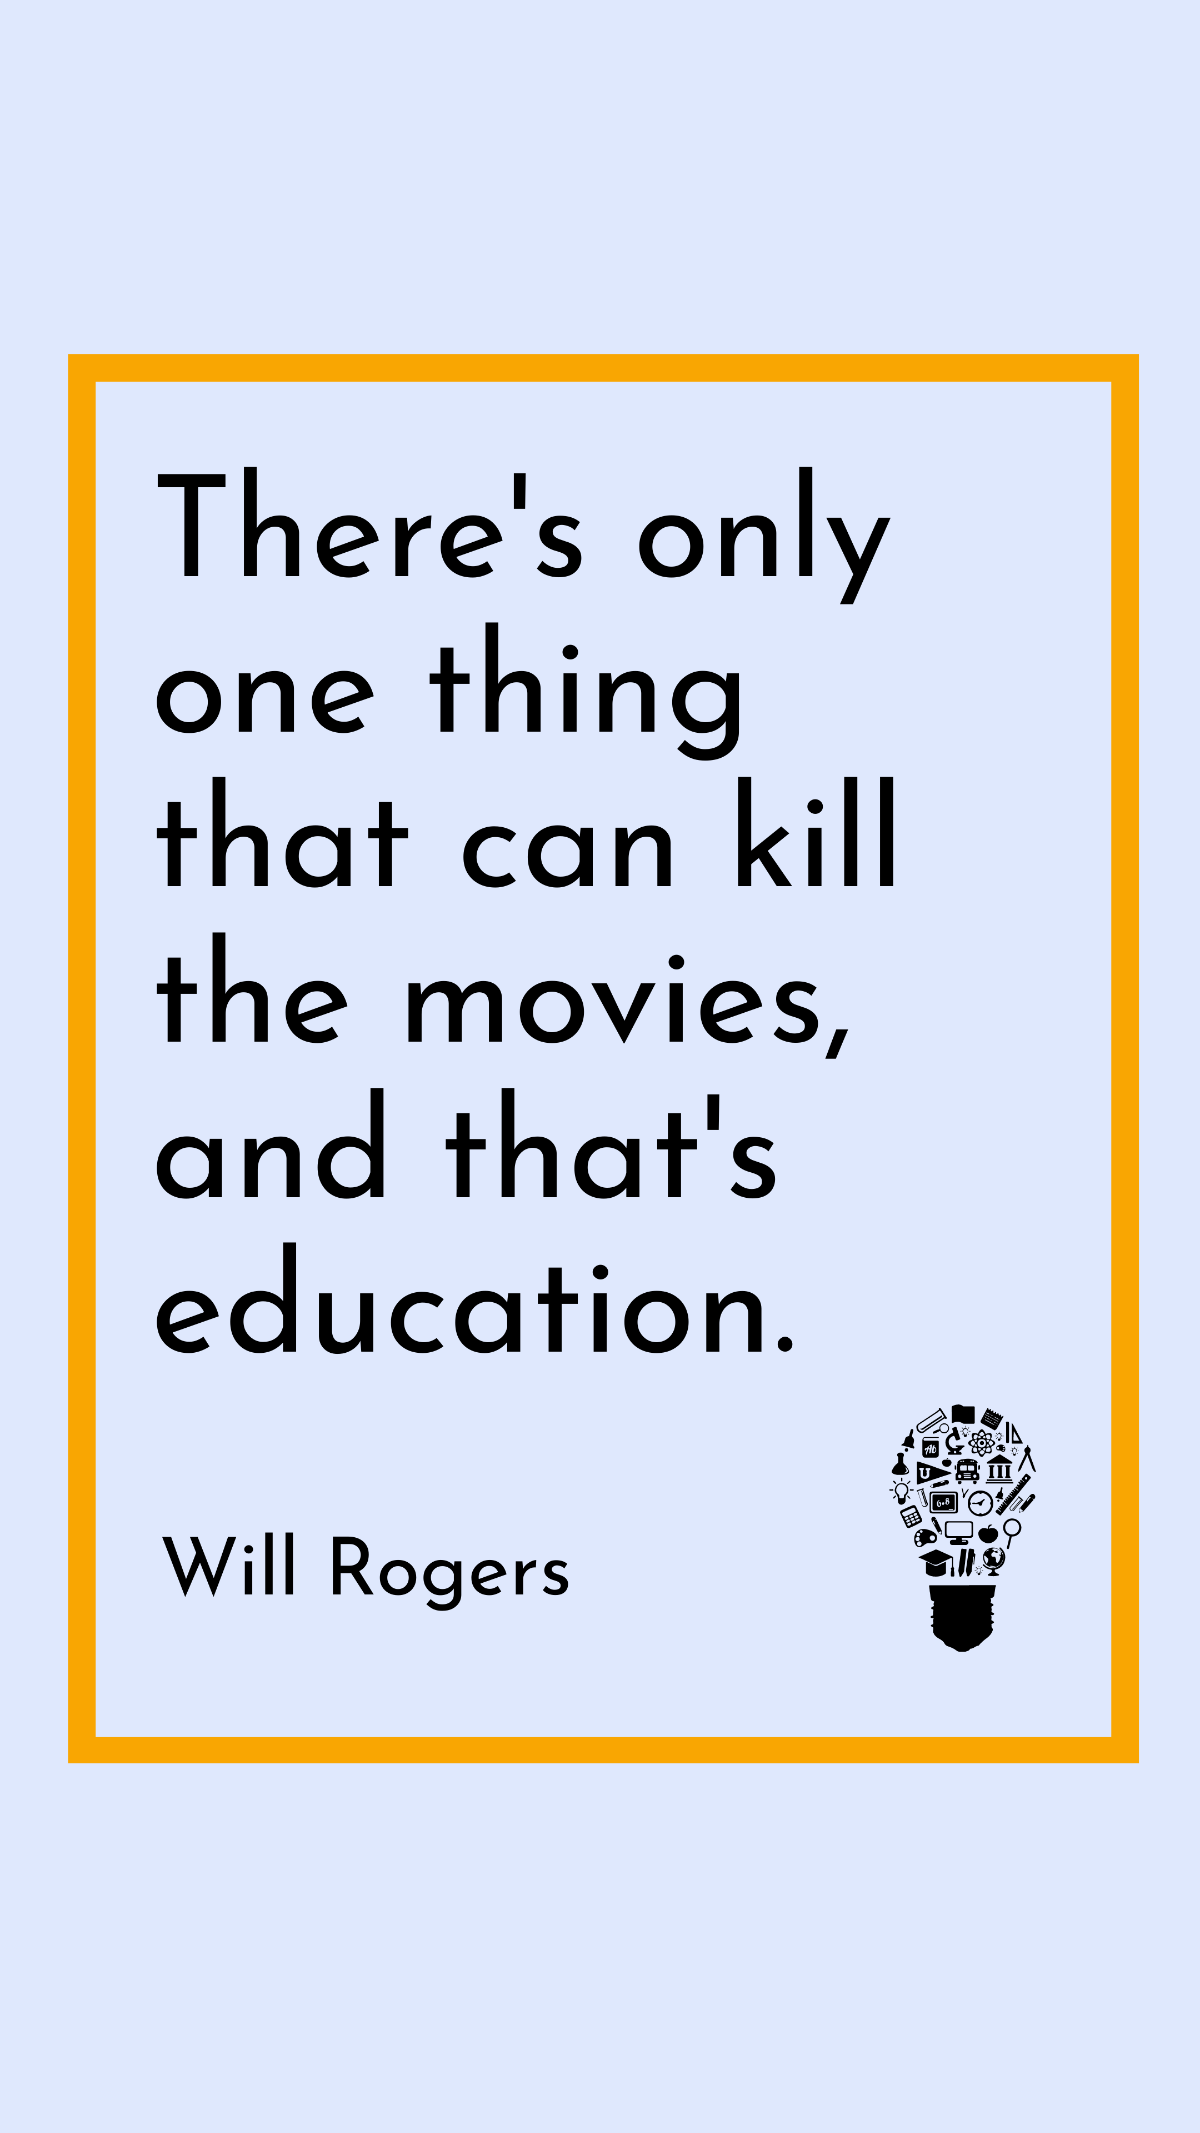 Will Rogers - There's only one thing that can kill the movies, and that's education. Template